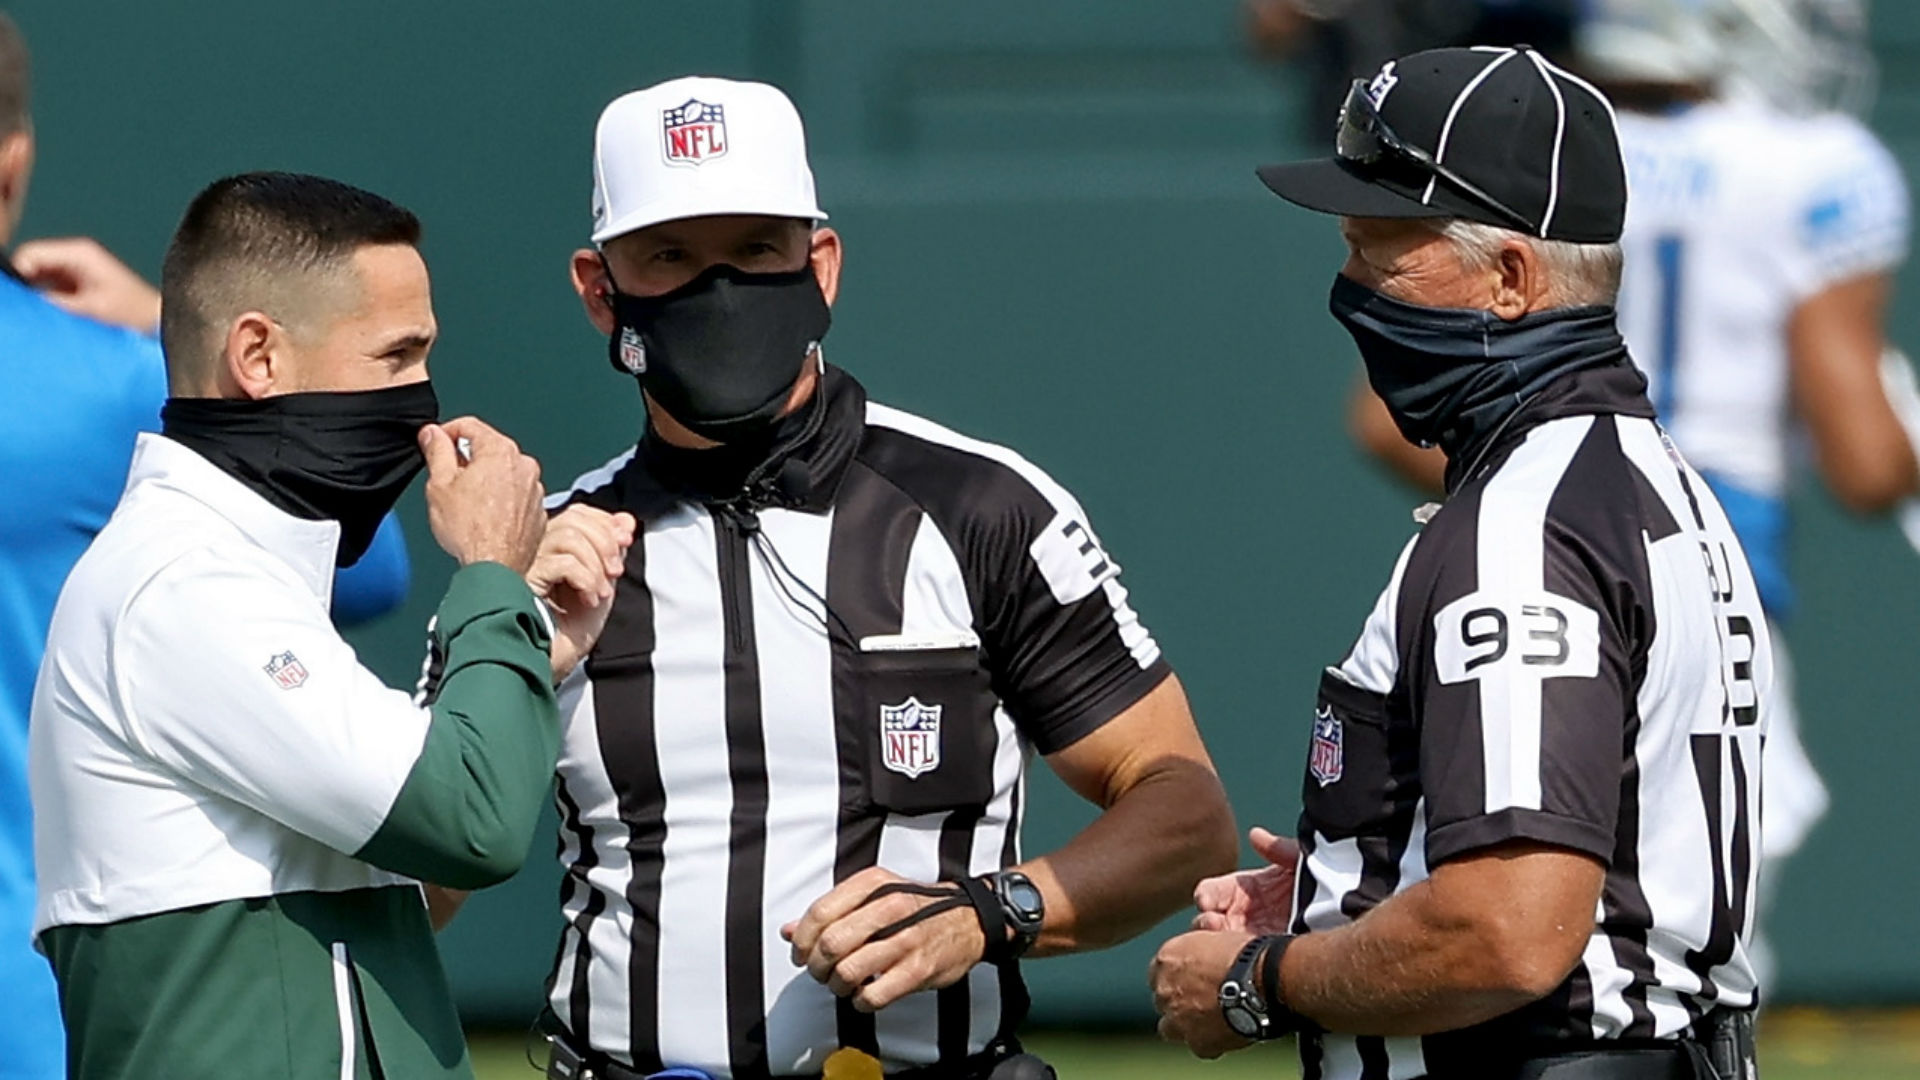 How Much Money Do Nfl Referees Make Salaries Pay Structure For Game Officials In 2020 Sporting News Canada